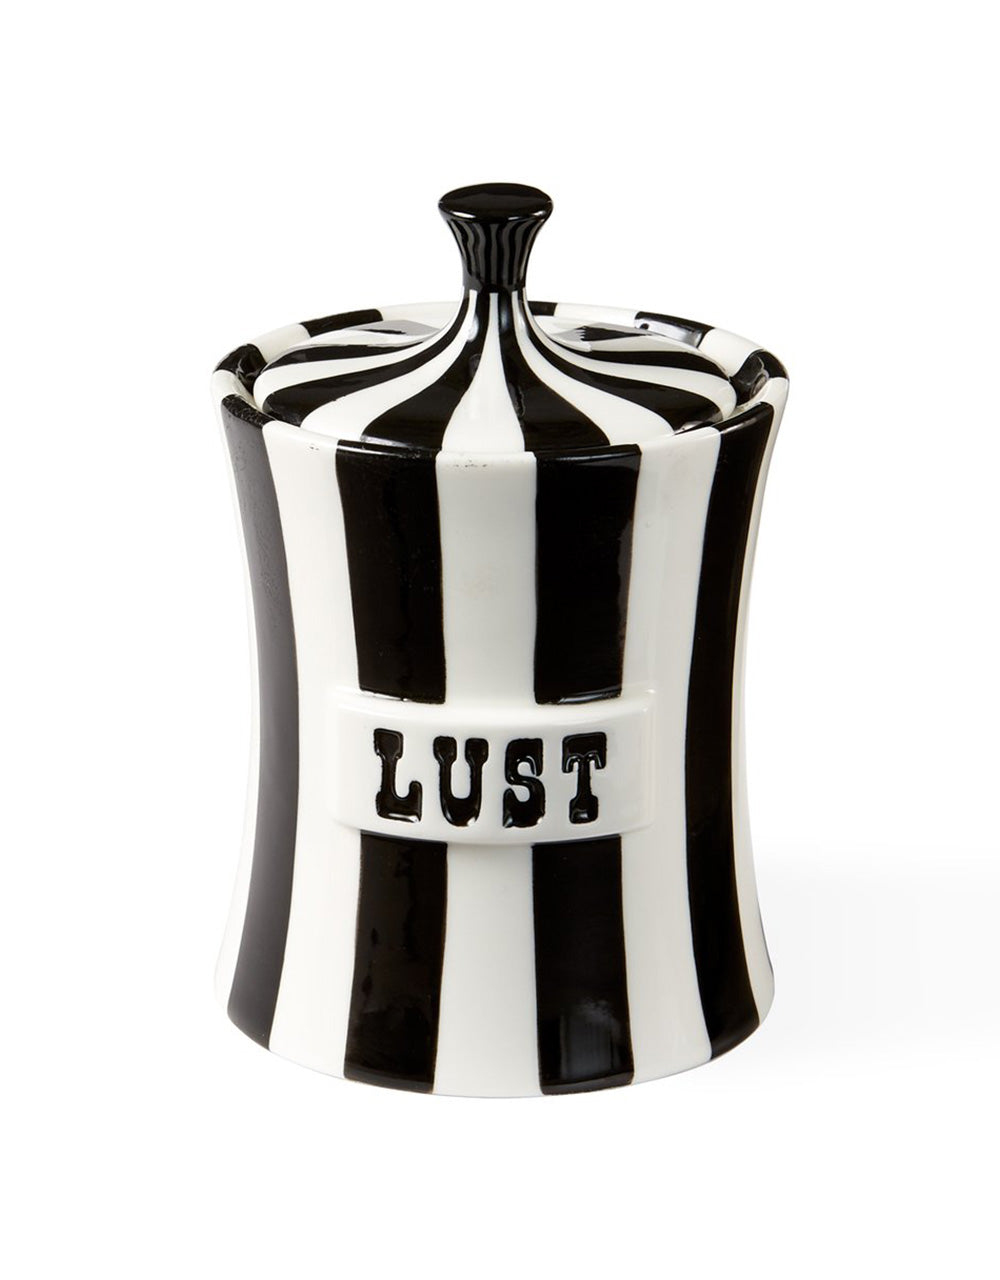 Vice Lust Candle